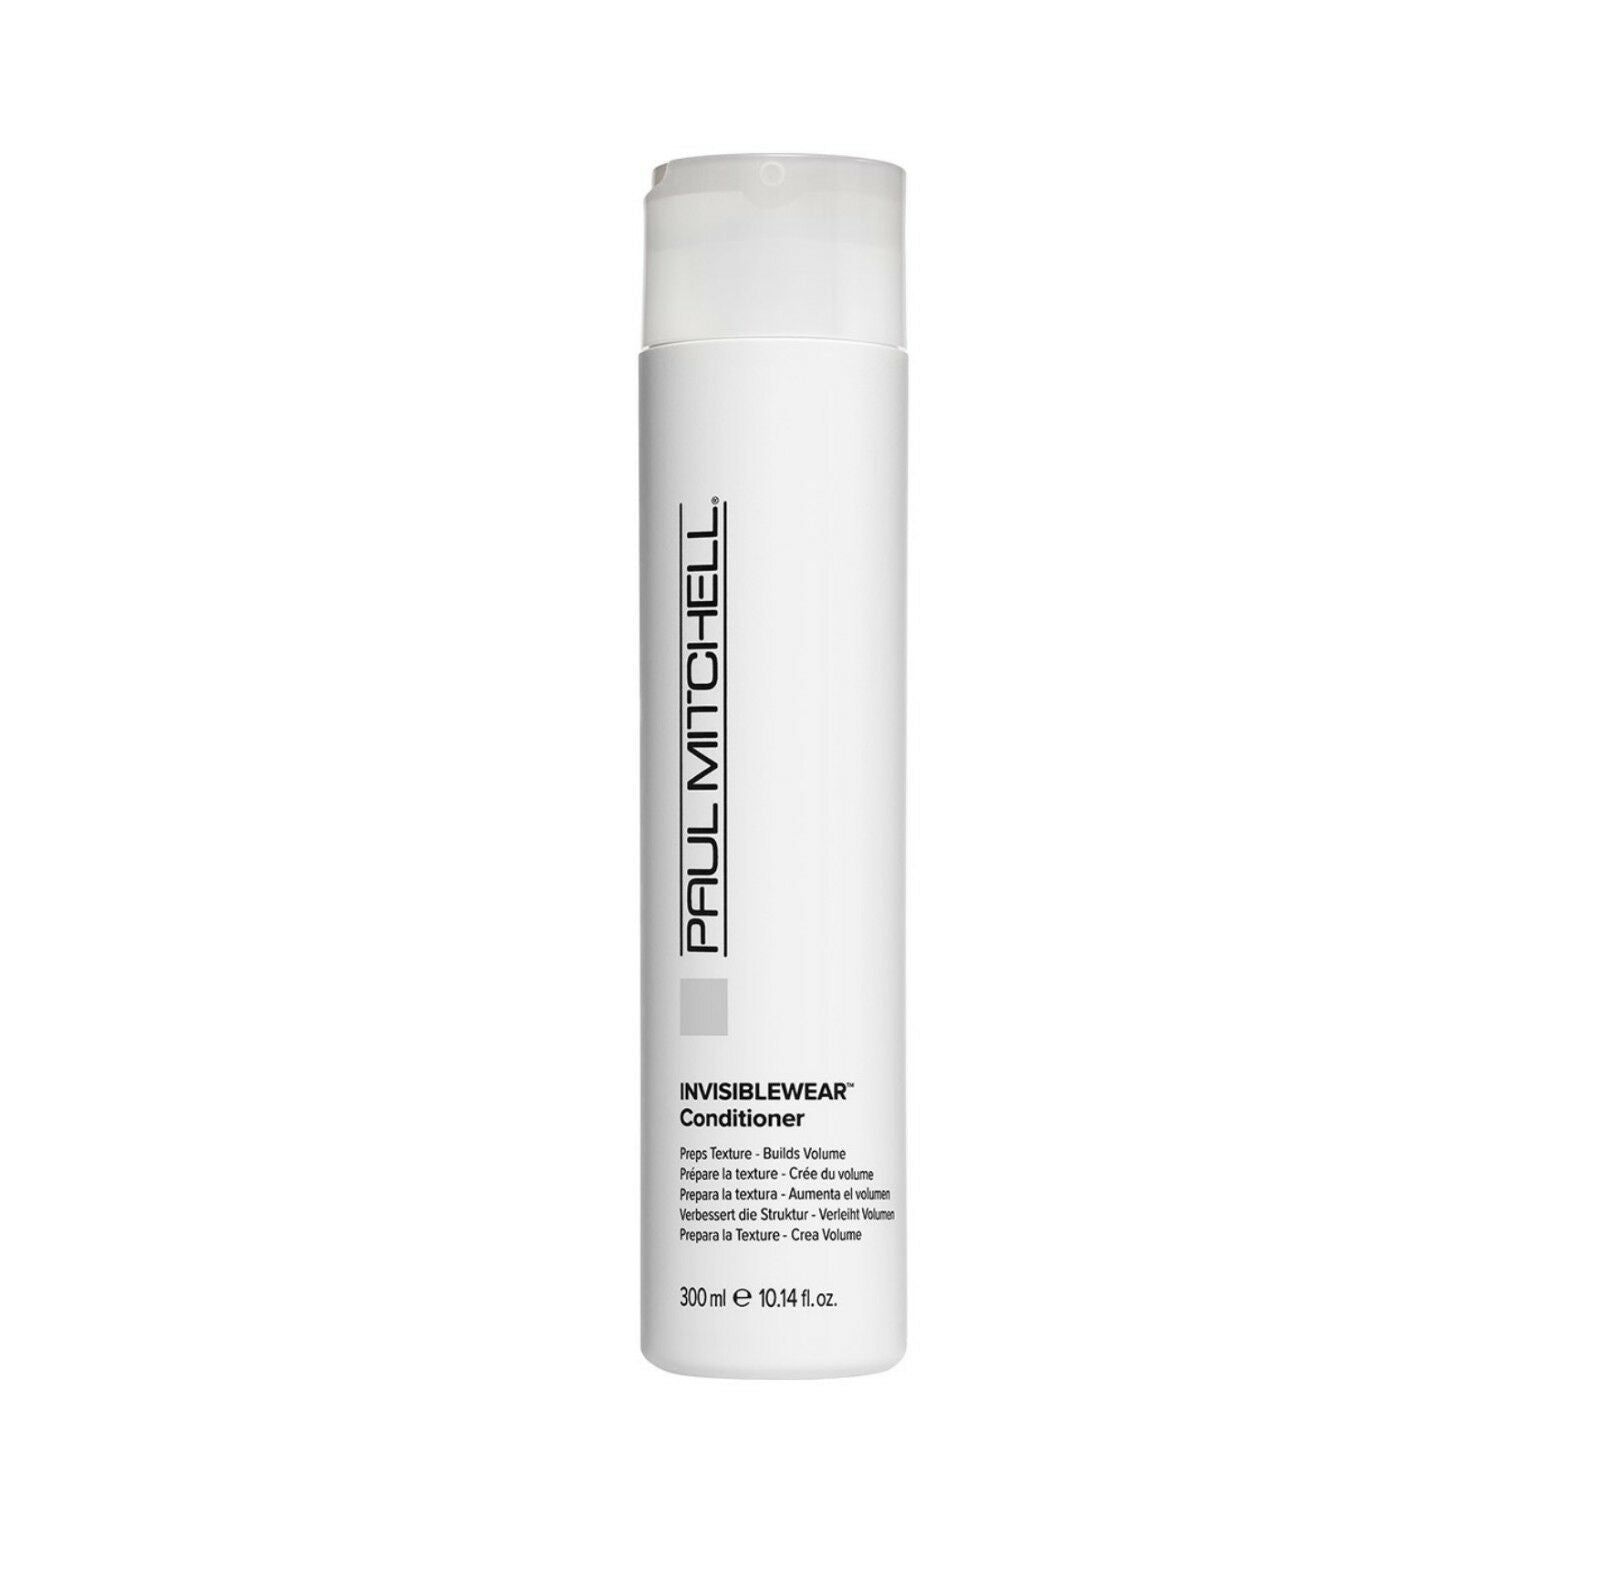 Paul Mitchell Invisiblewear Shampoo & conditioner Duo 300ml each Builds Volume - On Line Hair Depot